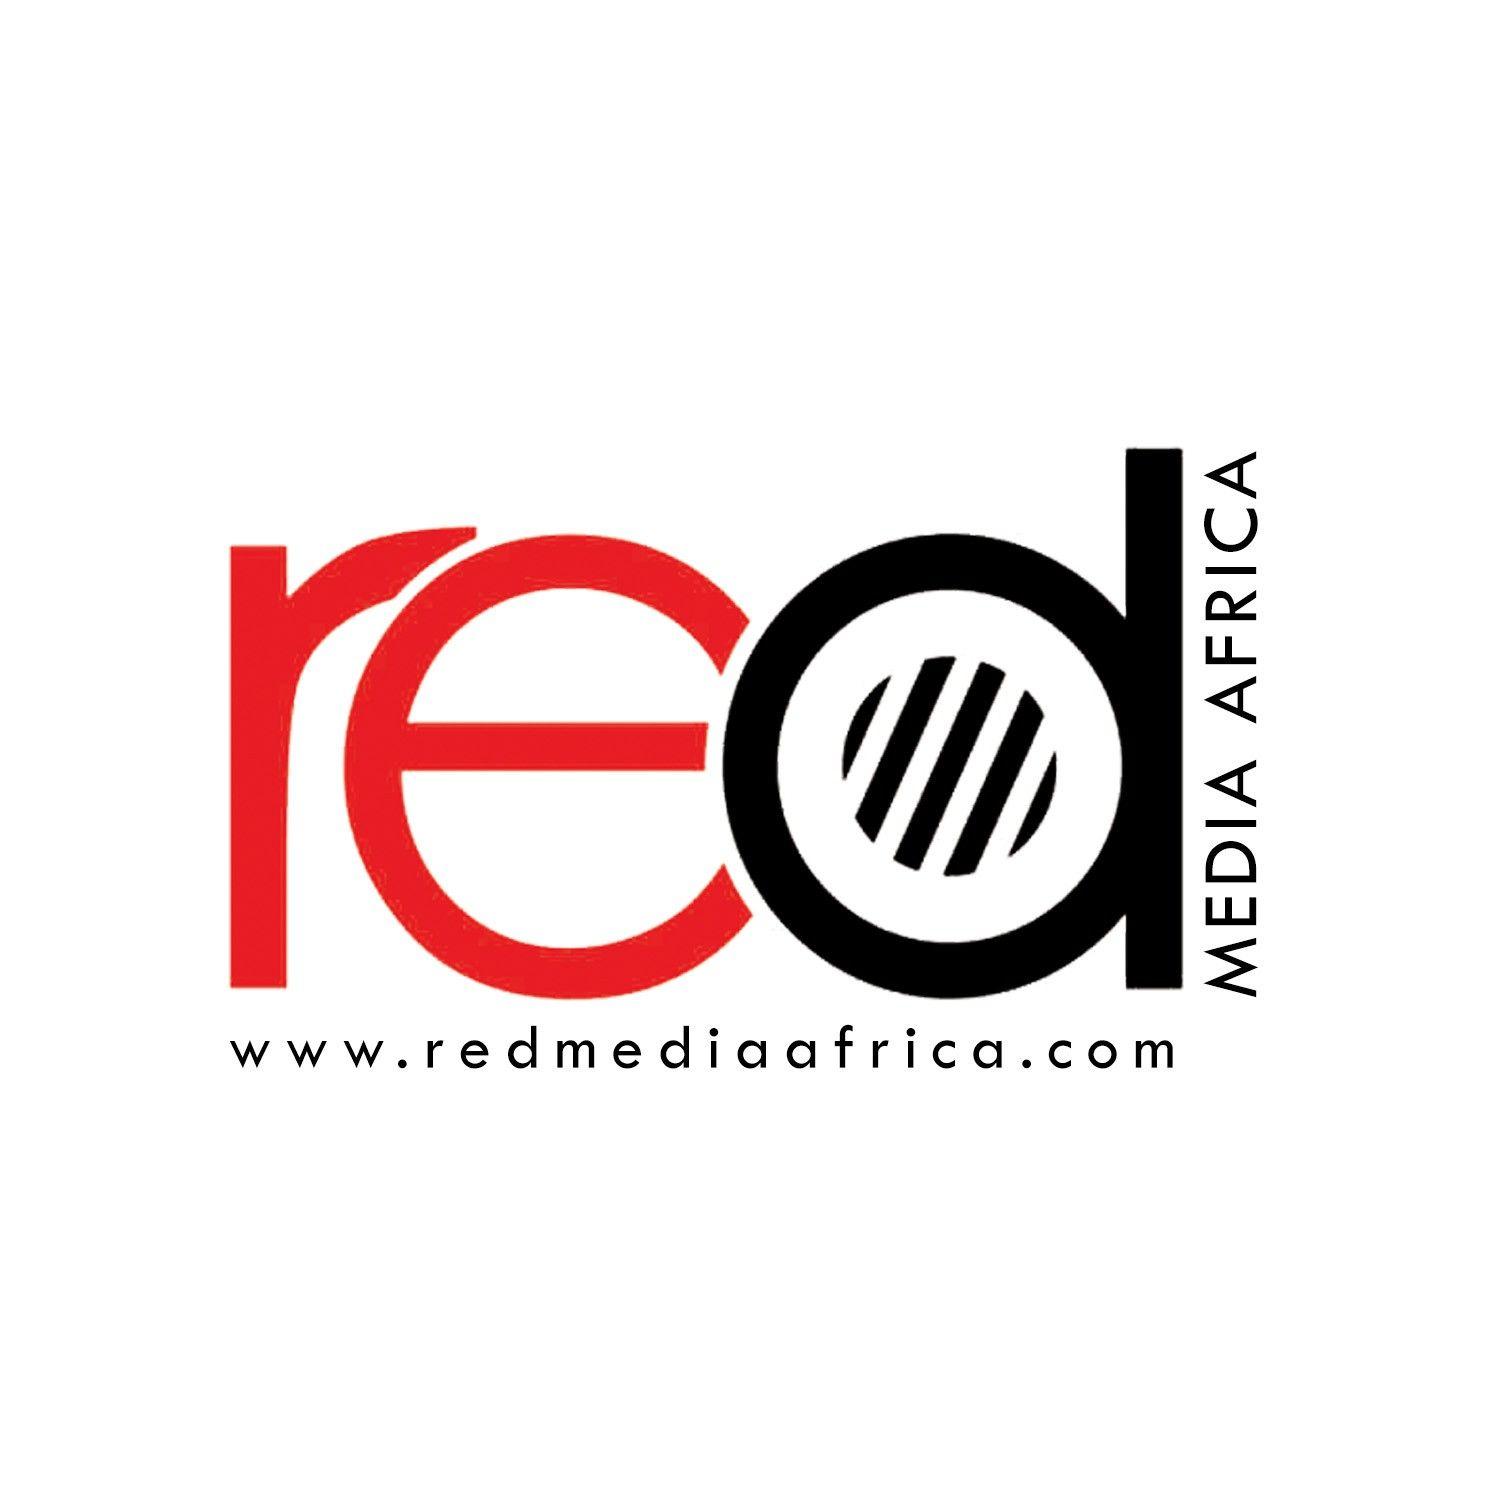 Red Media Logo - Are you up for it? Red Media Africa calls for new recruits DETAILS